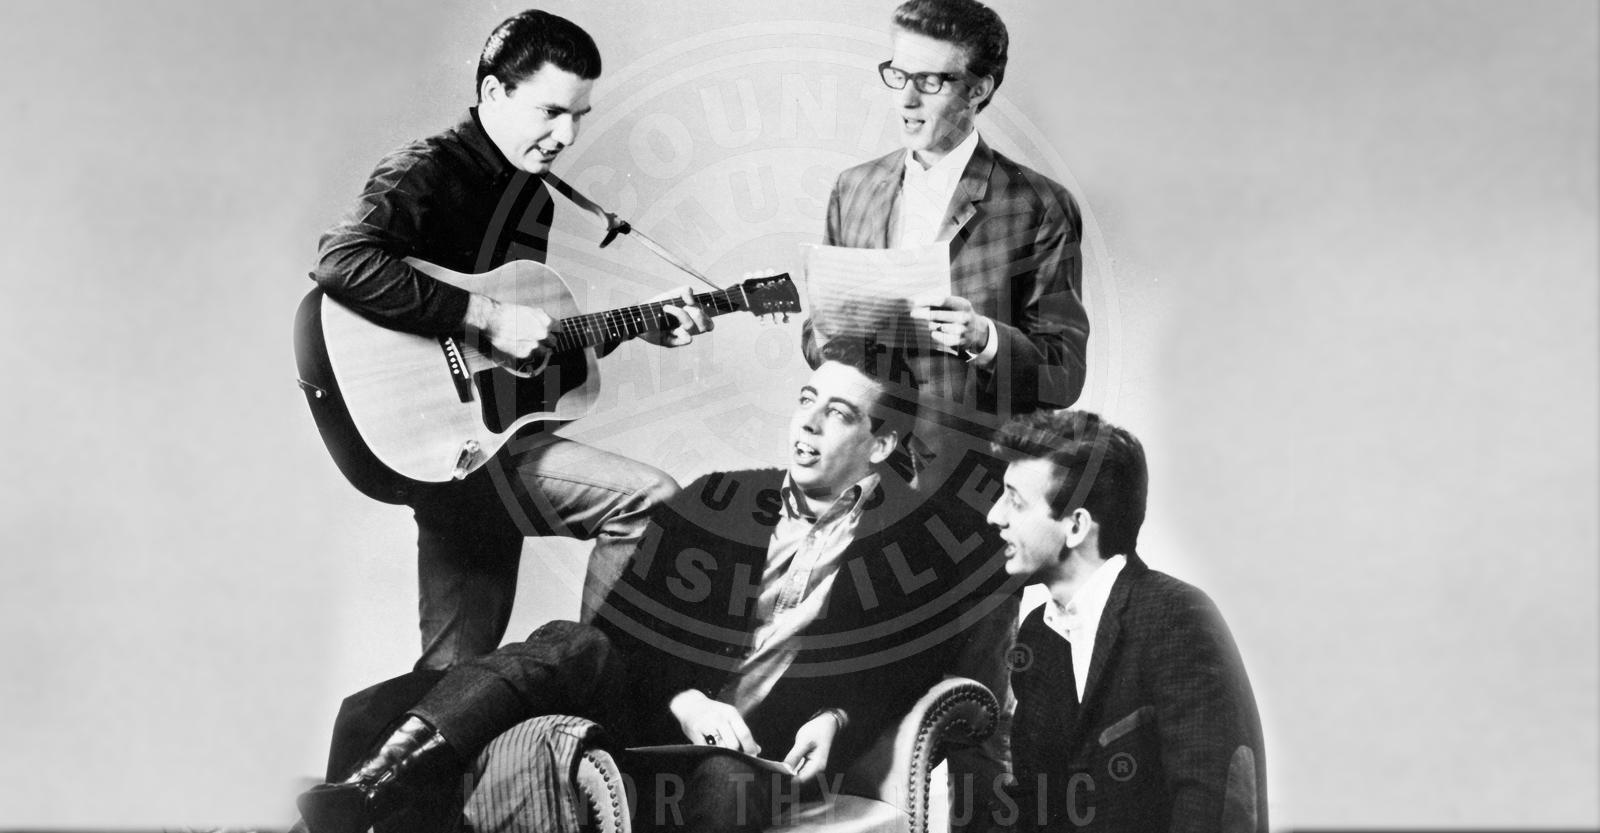 Happy birthday to Harold Reid of the members, The Statler Brothers. 